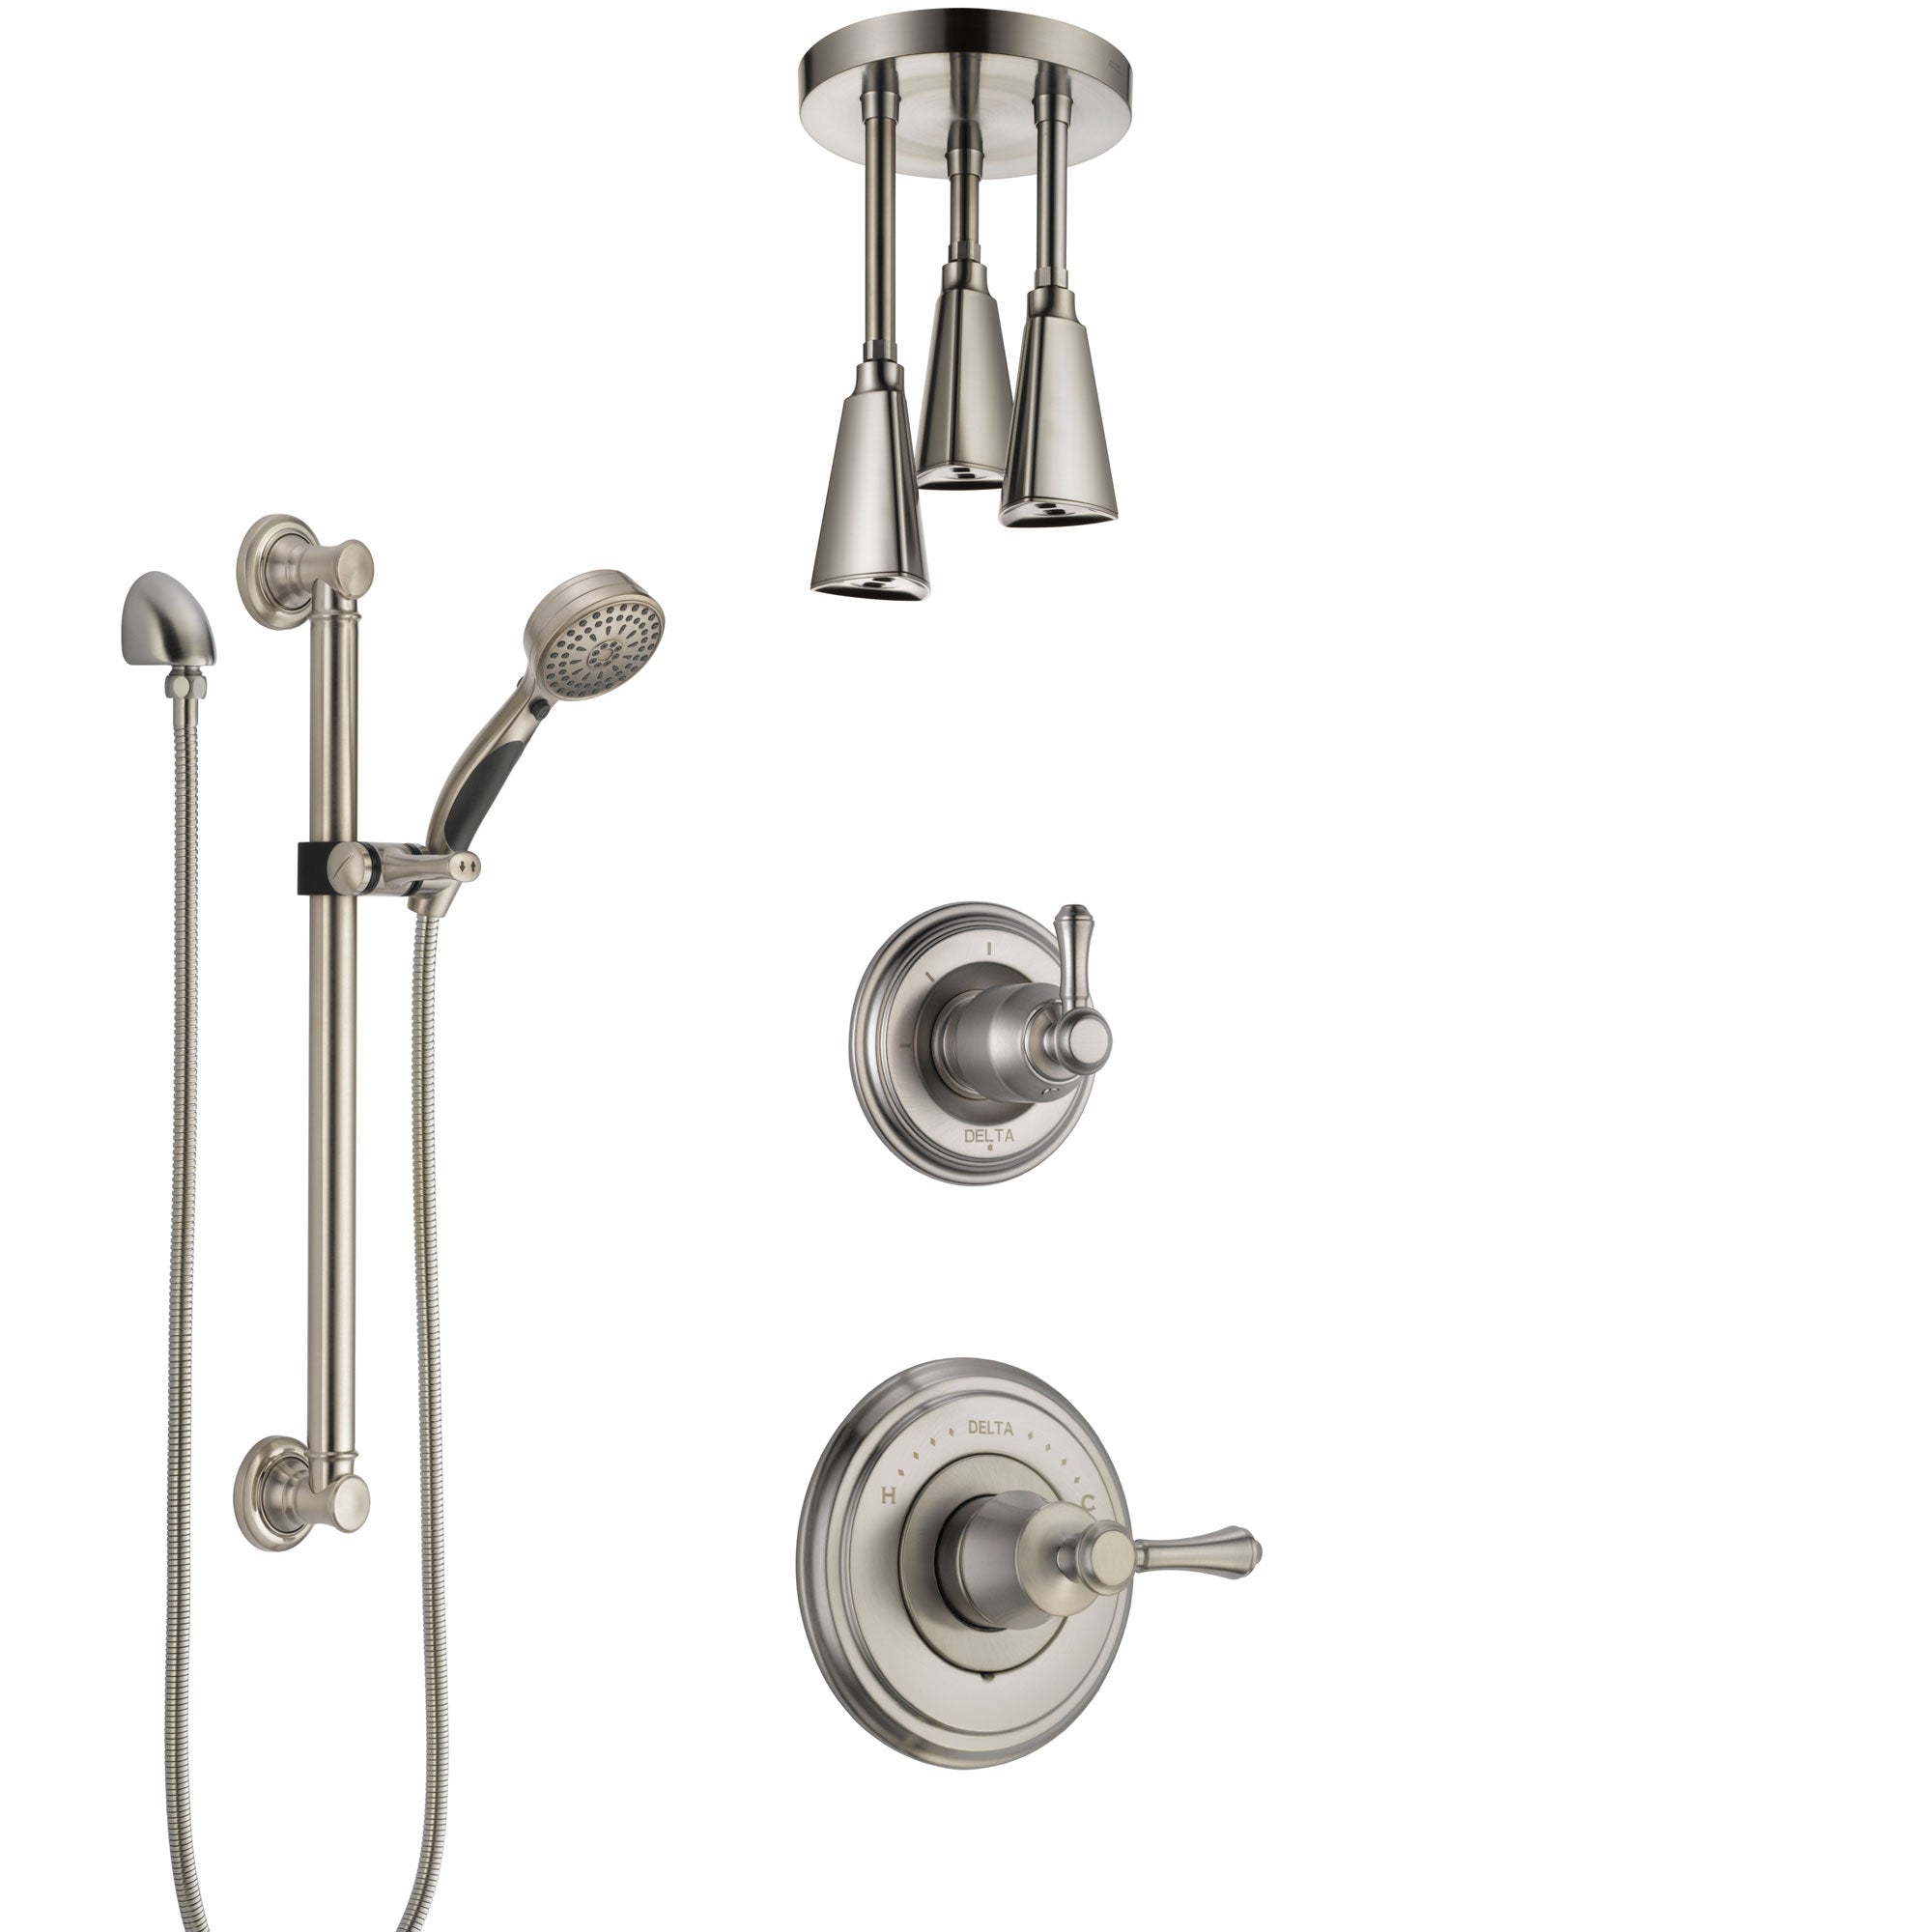 Delta Cassidy Stainless Steel Finish Shower System with Control Handle, Diverter, Ceiling Mount Showerhead, and Hand Shower with Grab Bar SS14973SS5